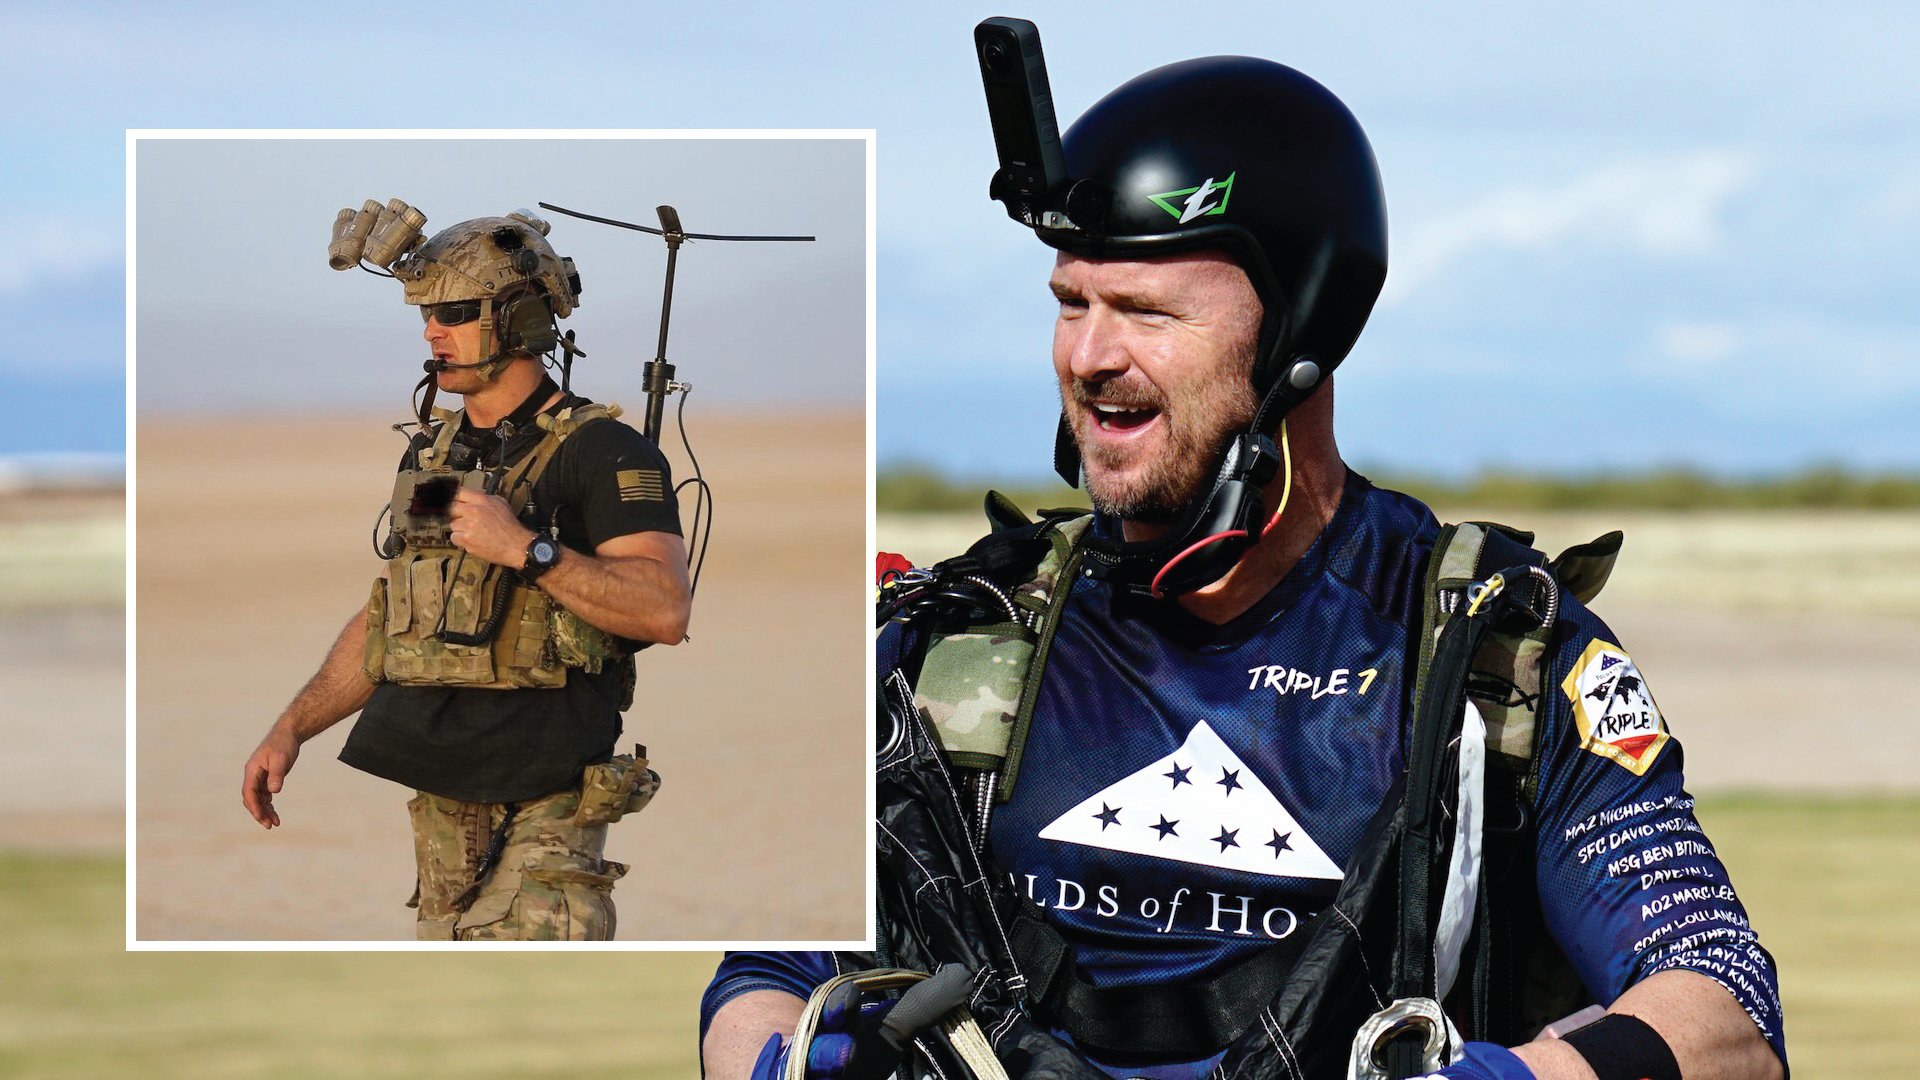 Retired Navy SEAL Mike Sarraille, the organizer of the Triple 7 Expedition, collects his parachute after a skydive in Coolidge, Arizona, December 2022. Photos courtesy Mike Sarraille and Legacy Expeditions.